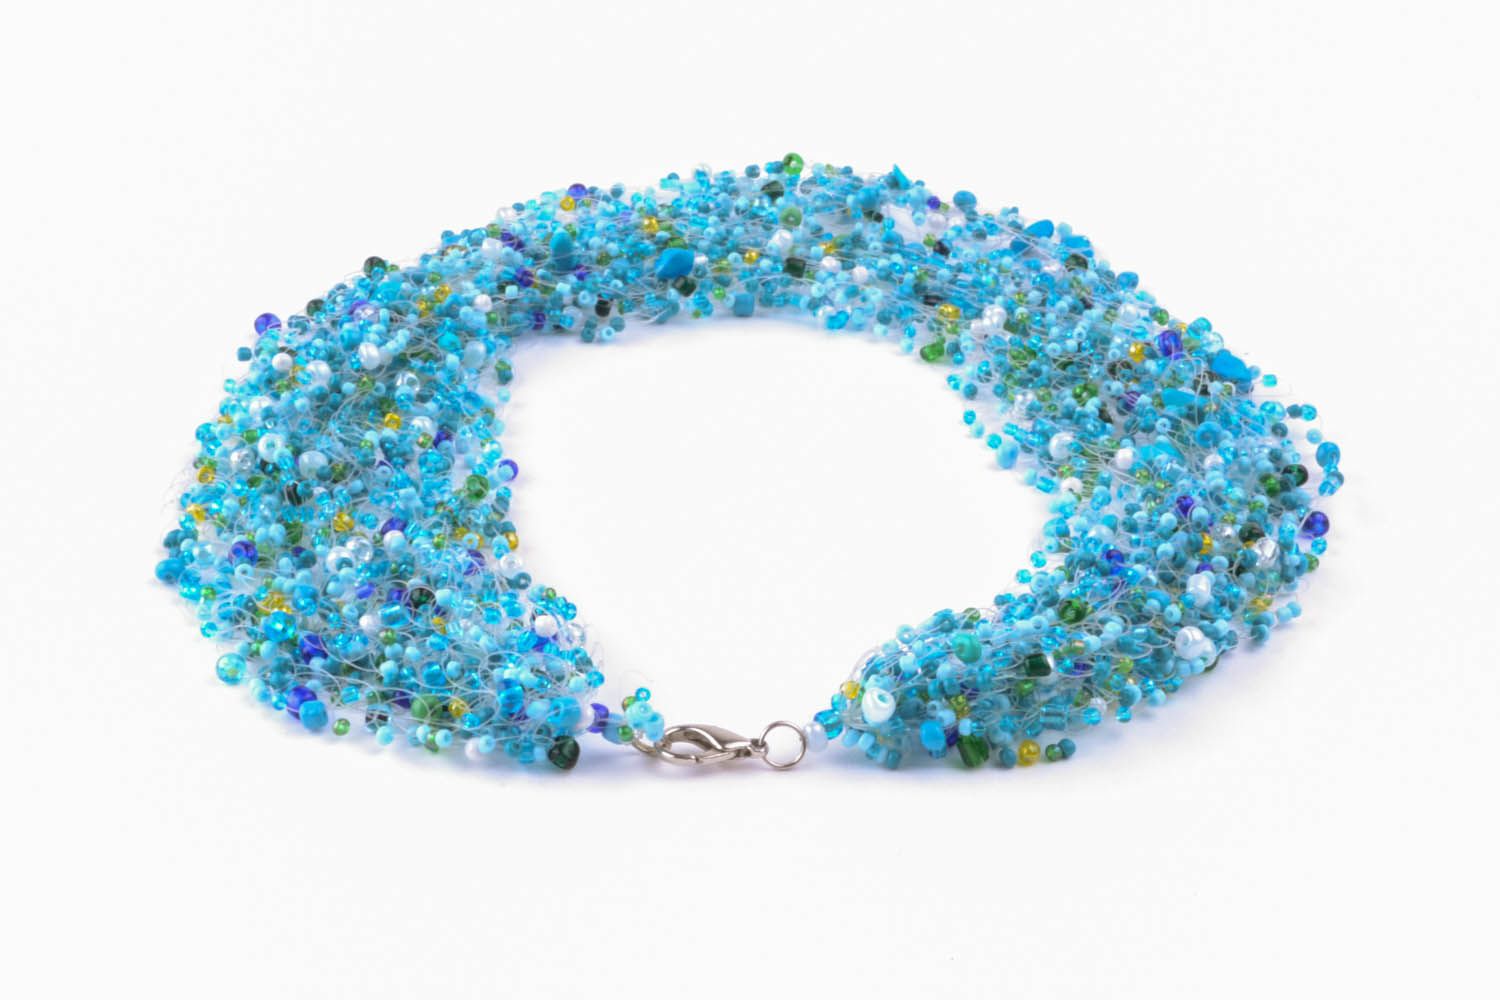 Beaded necklace made of natural stones photo 3